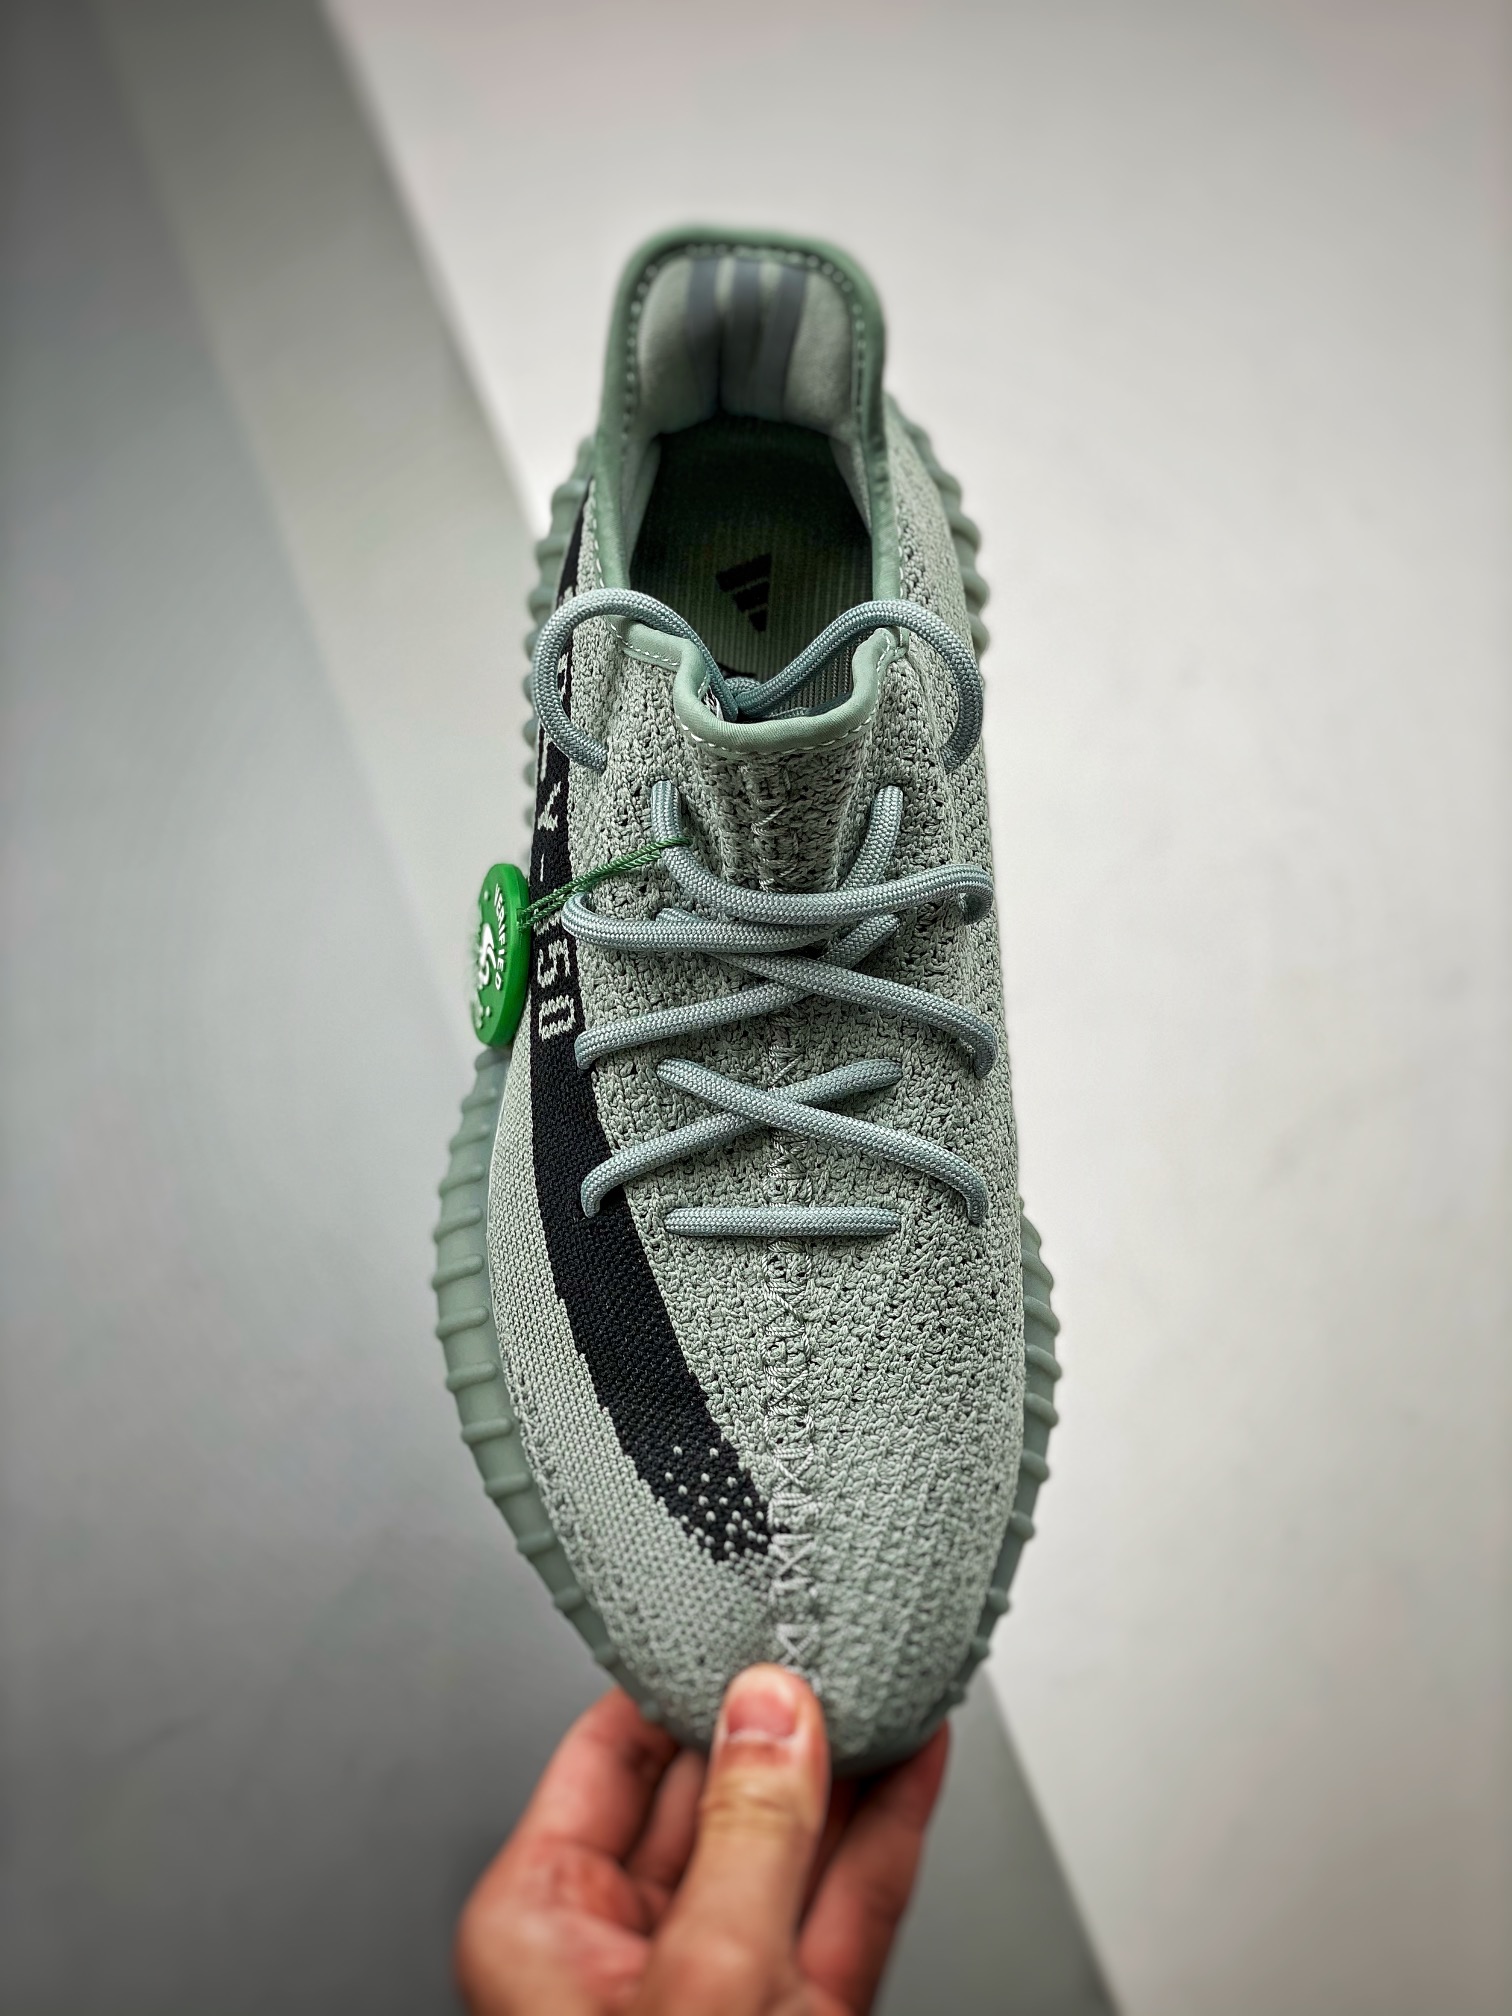 adidas Yeezy Boost 350 V2 “Granite” HQ2059 For Sale – Sneaker Hello